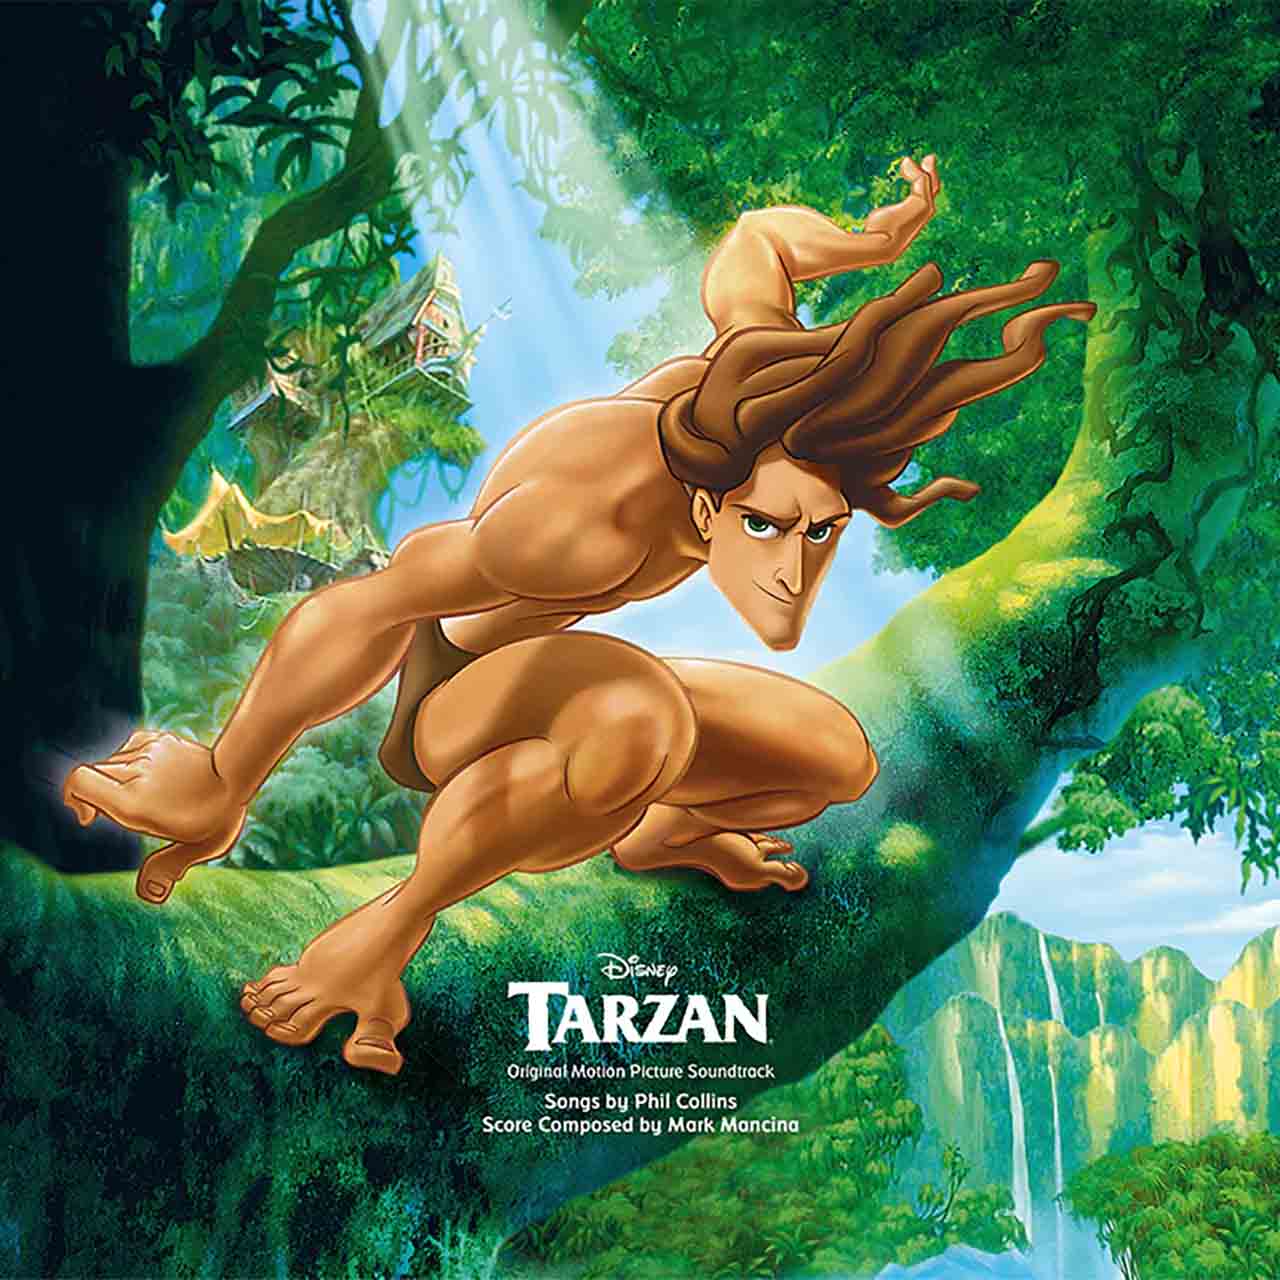 ‘Tarzan’: When Disney Tapped Phil Collins For A Masterpiece